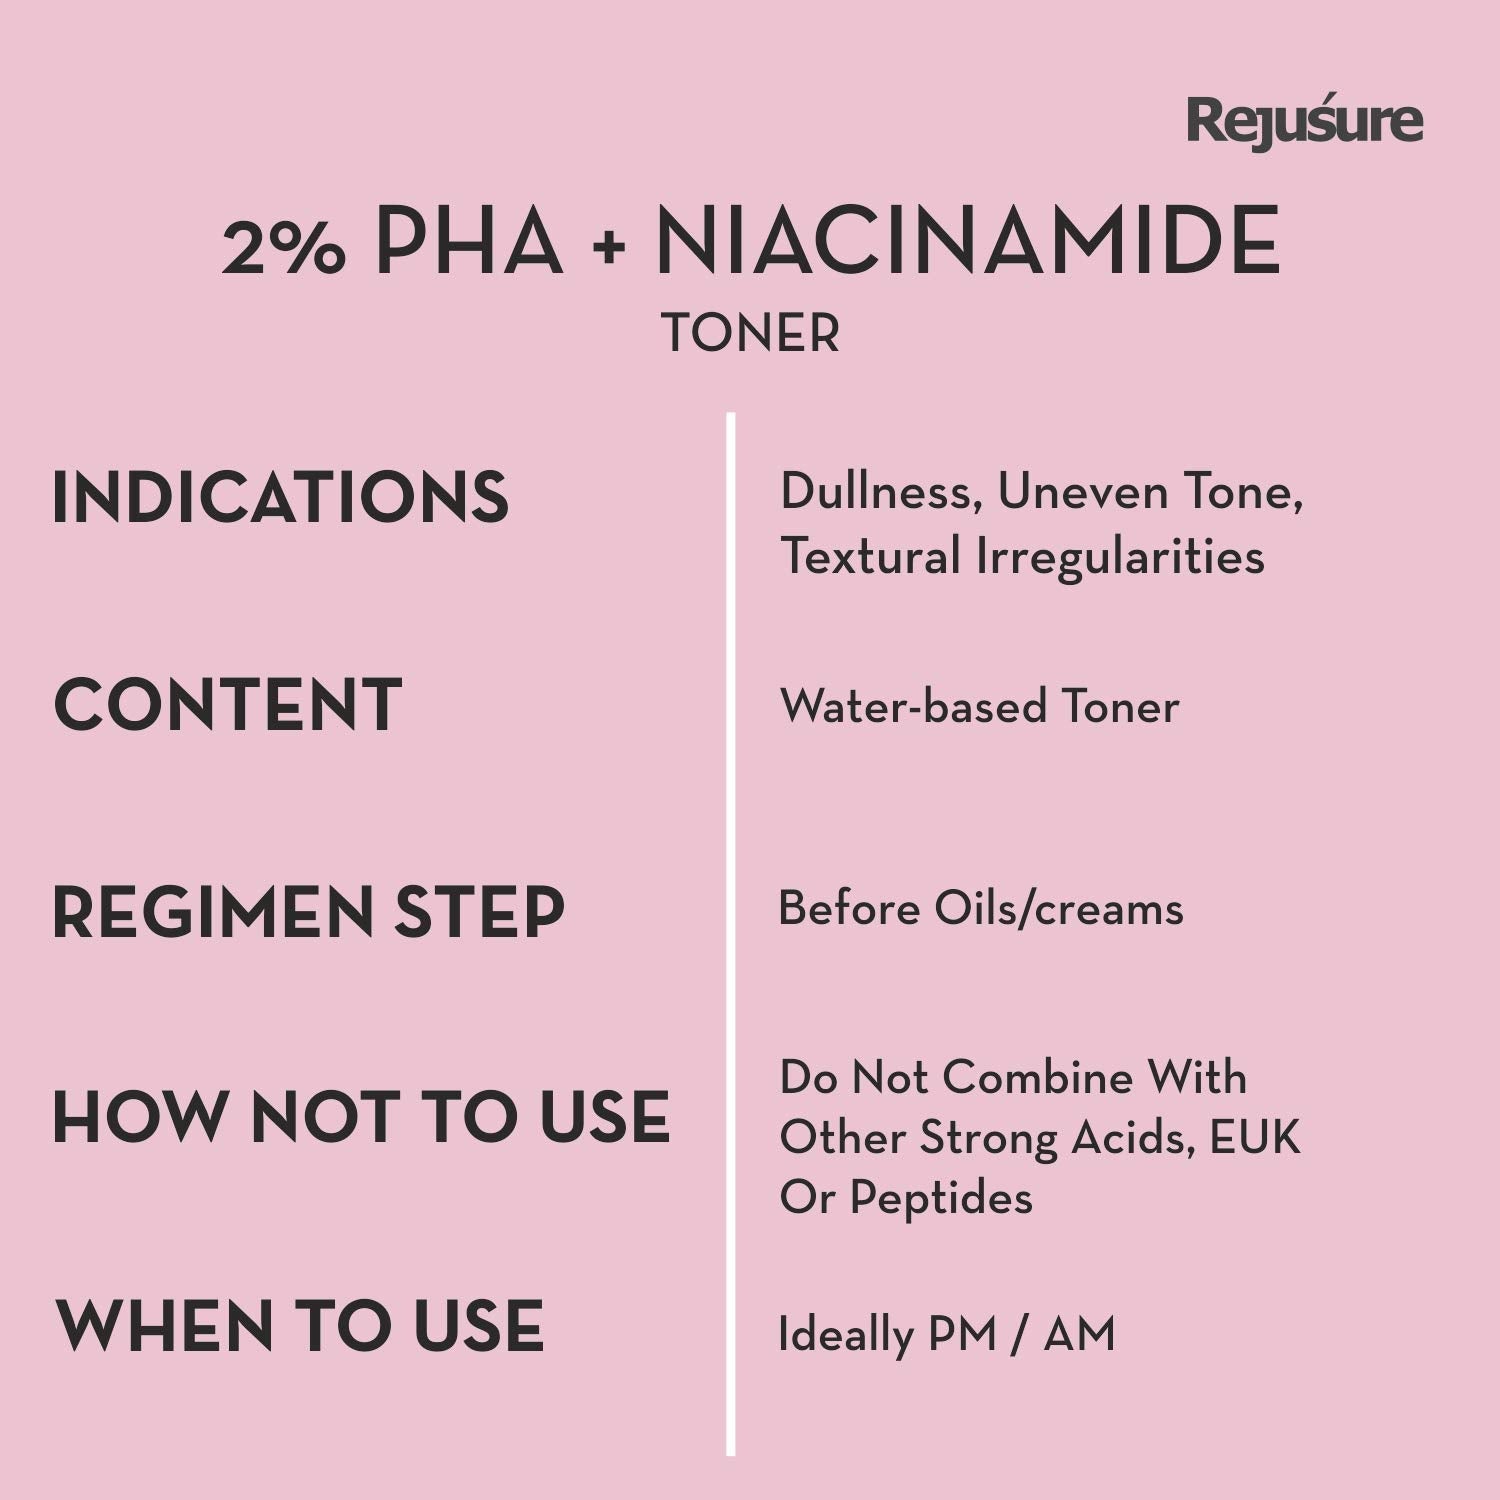 Rejusure PHA 2% + Niacinamide Alcohol Free Face Mist Toner For Mild Exfoliation & Pore Tightening Best for Oily & Normal Skin - 100ml (Pack of 5)